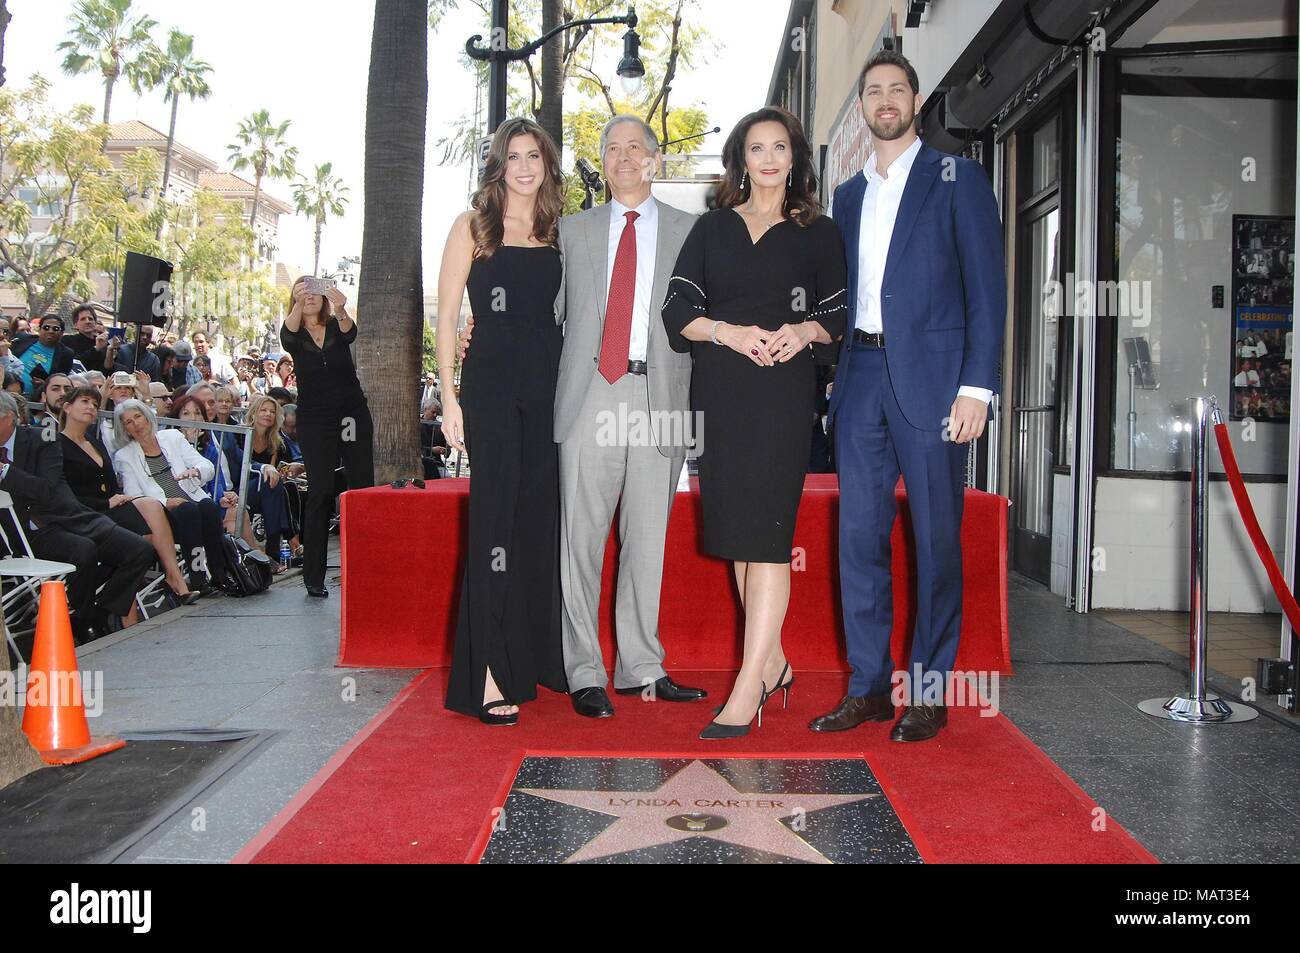 Los Angeles, CA, USA. 3rd Apr, 2018. Lynda Carter, family at the induction ceremony for Star on the Hollywood Walk of Fame for Lynda Carter, Hollywood Boulevard, Los Angeles, CA April 3, 2018. Credit: Michael Germana/Everett Collection/Alamy Live News Stock Photo